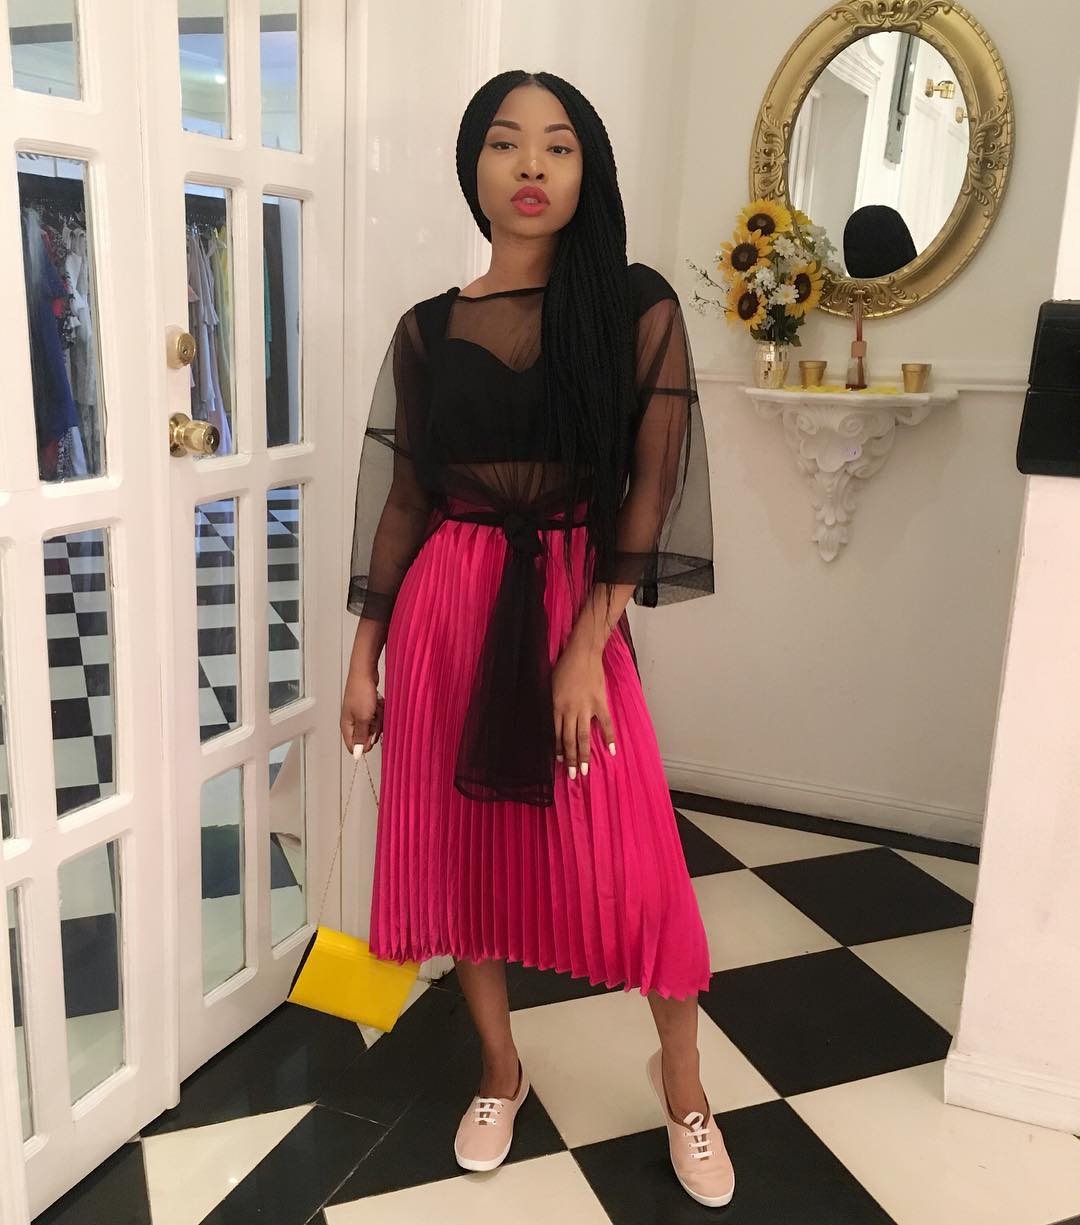 The 2 Genius Ways Of Styling The Mesh Top — According Mocheddah - FPN